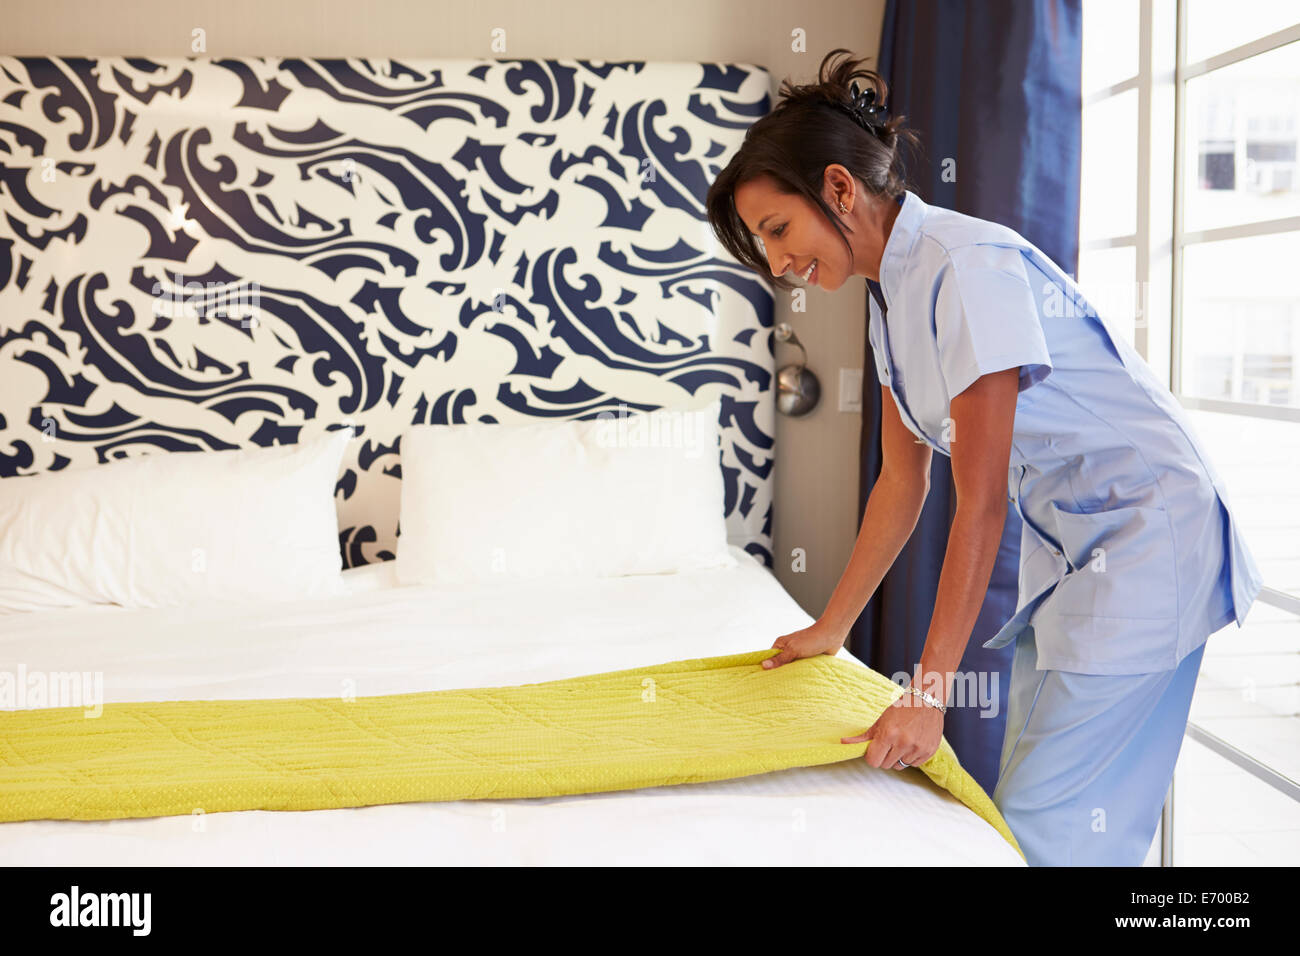 Maid Tidying Hotel Room And Making Bed Stock Photo